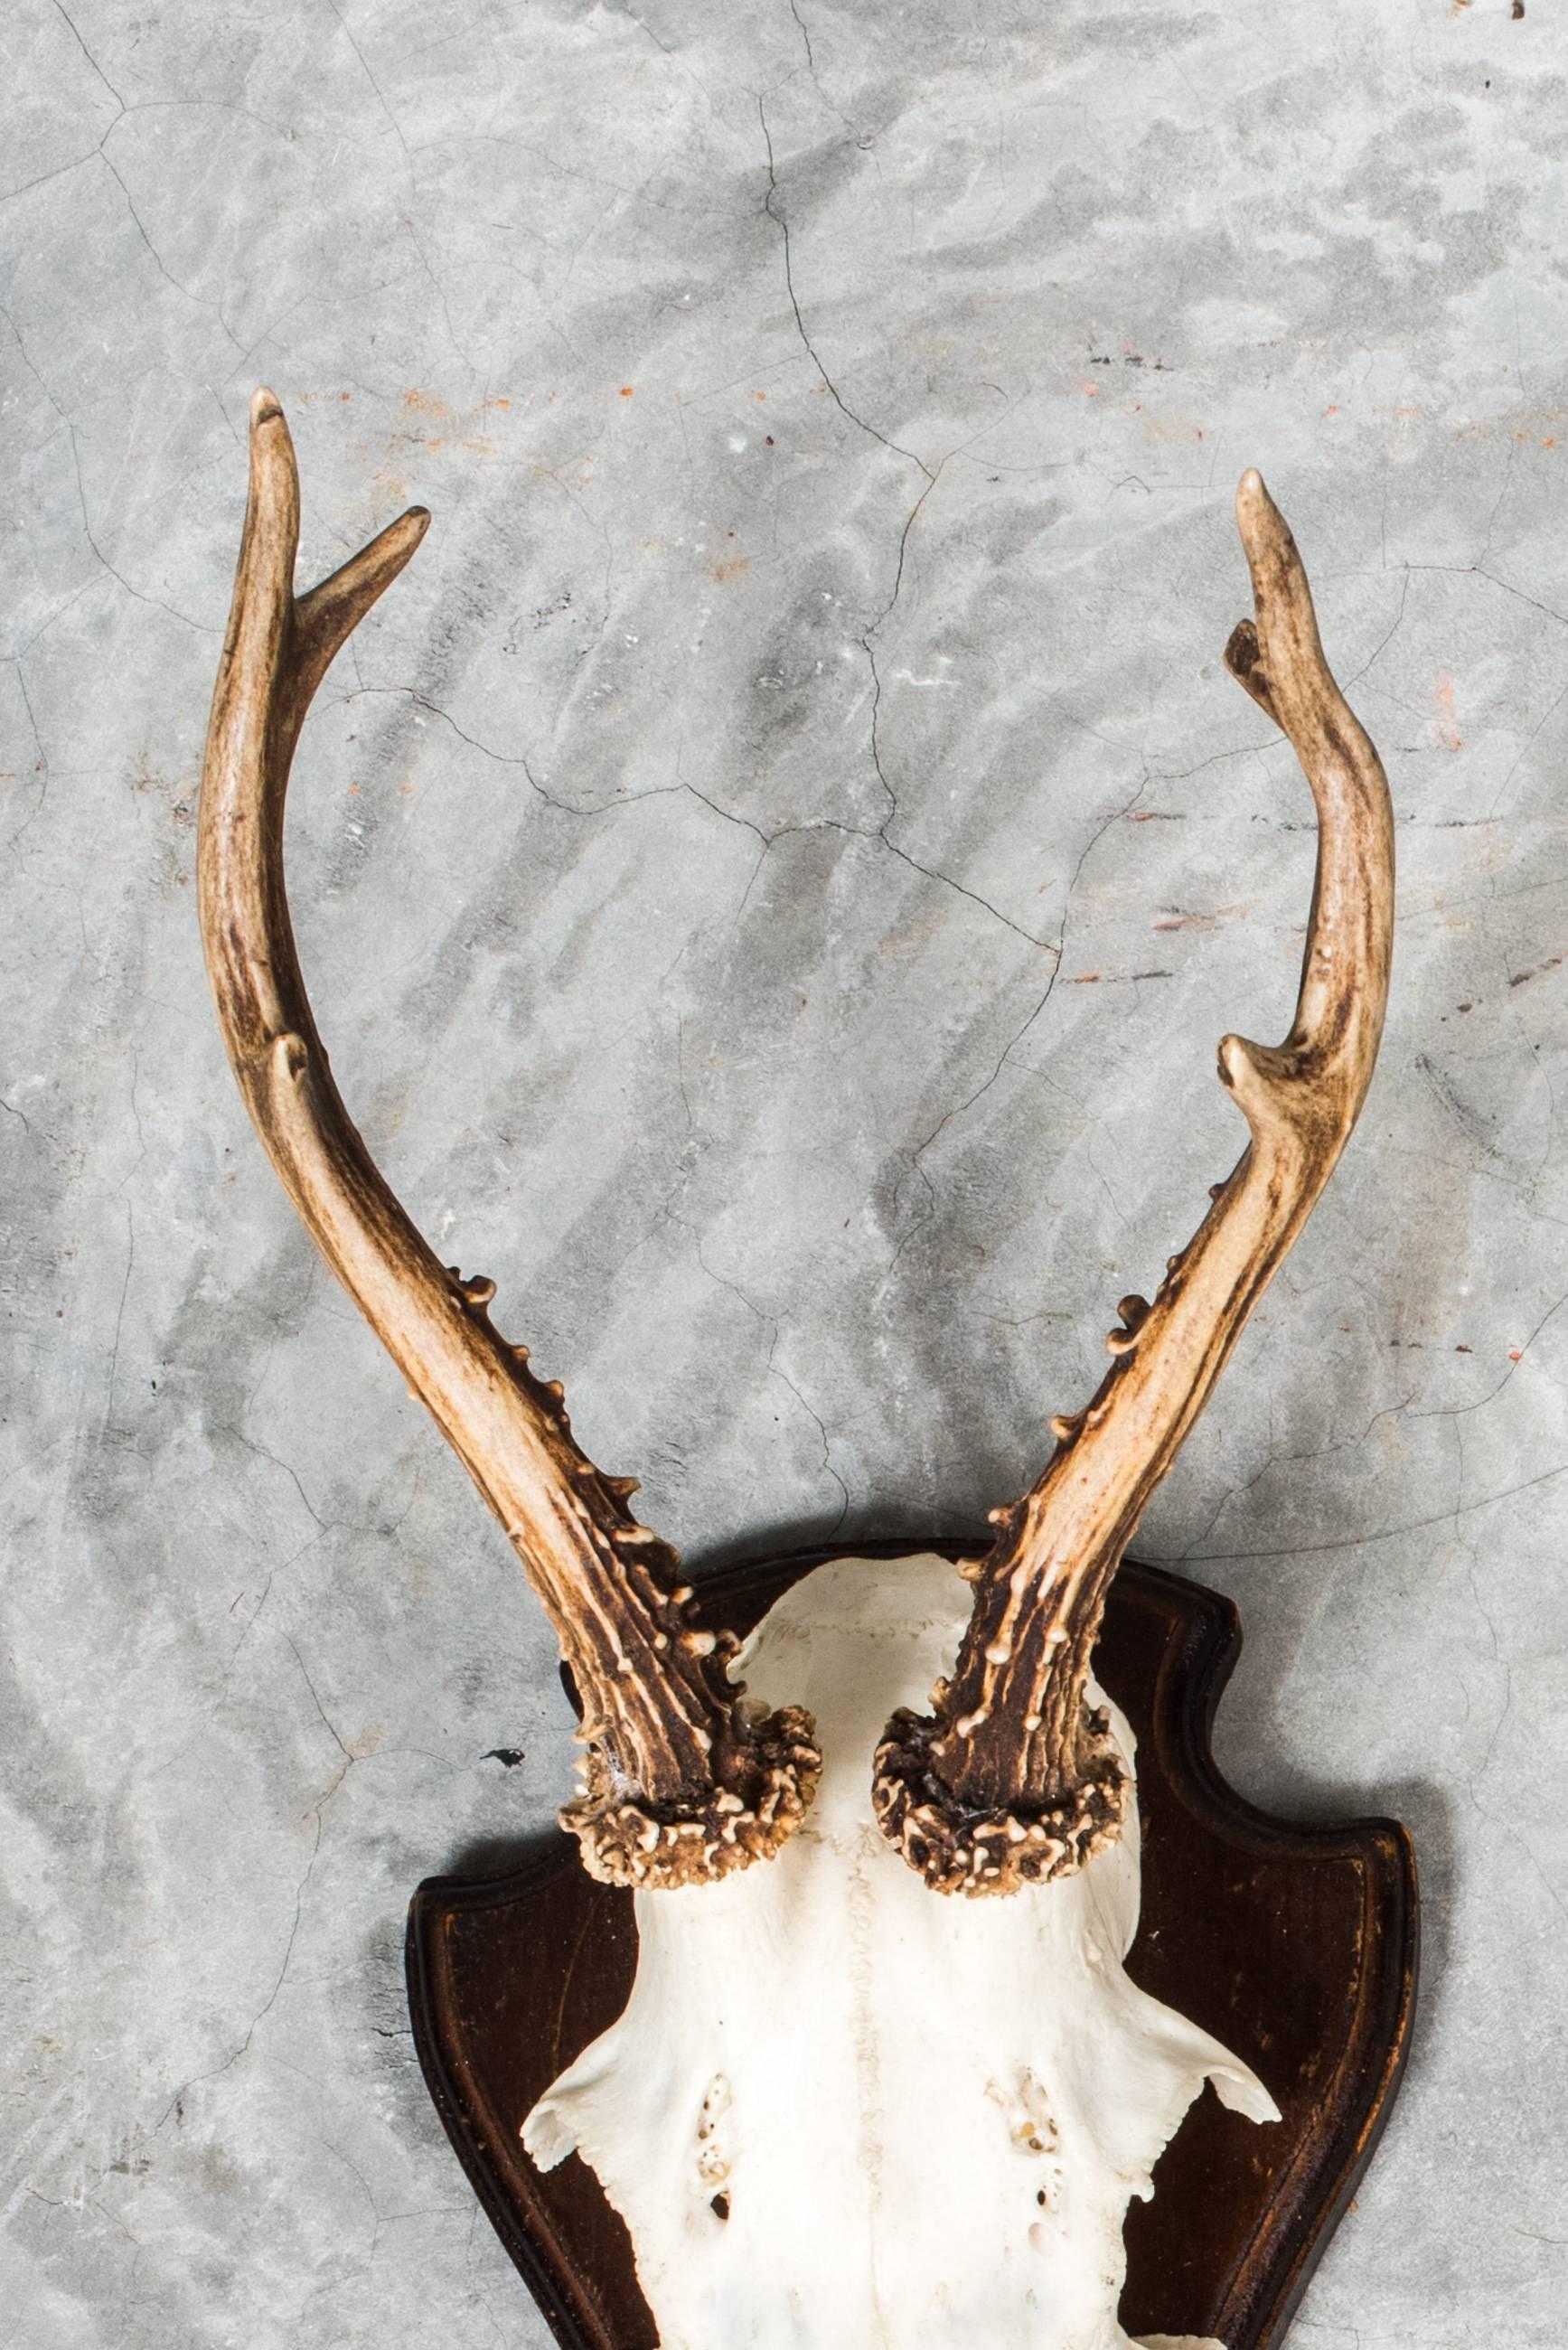 Two remaining small antlers are each mounted on shield-shaped stained wood plaques. They are decorative pieces and can be used to hang light objects. Found in Denmark.